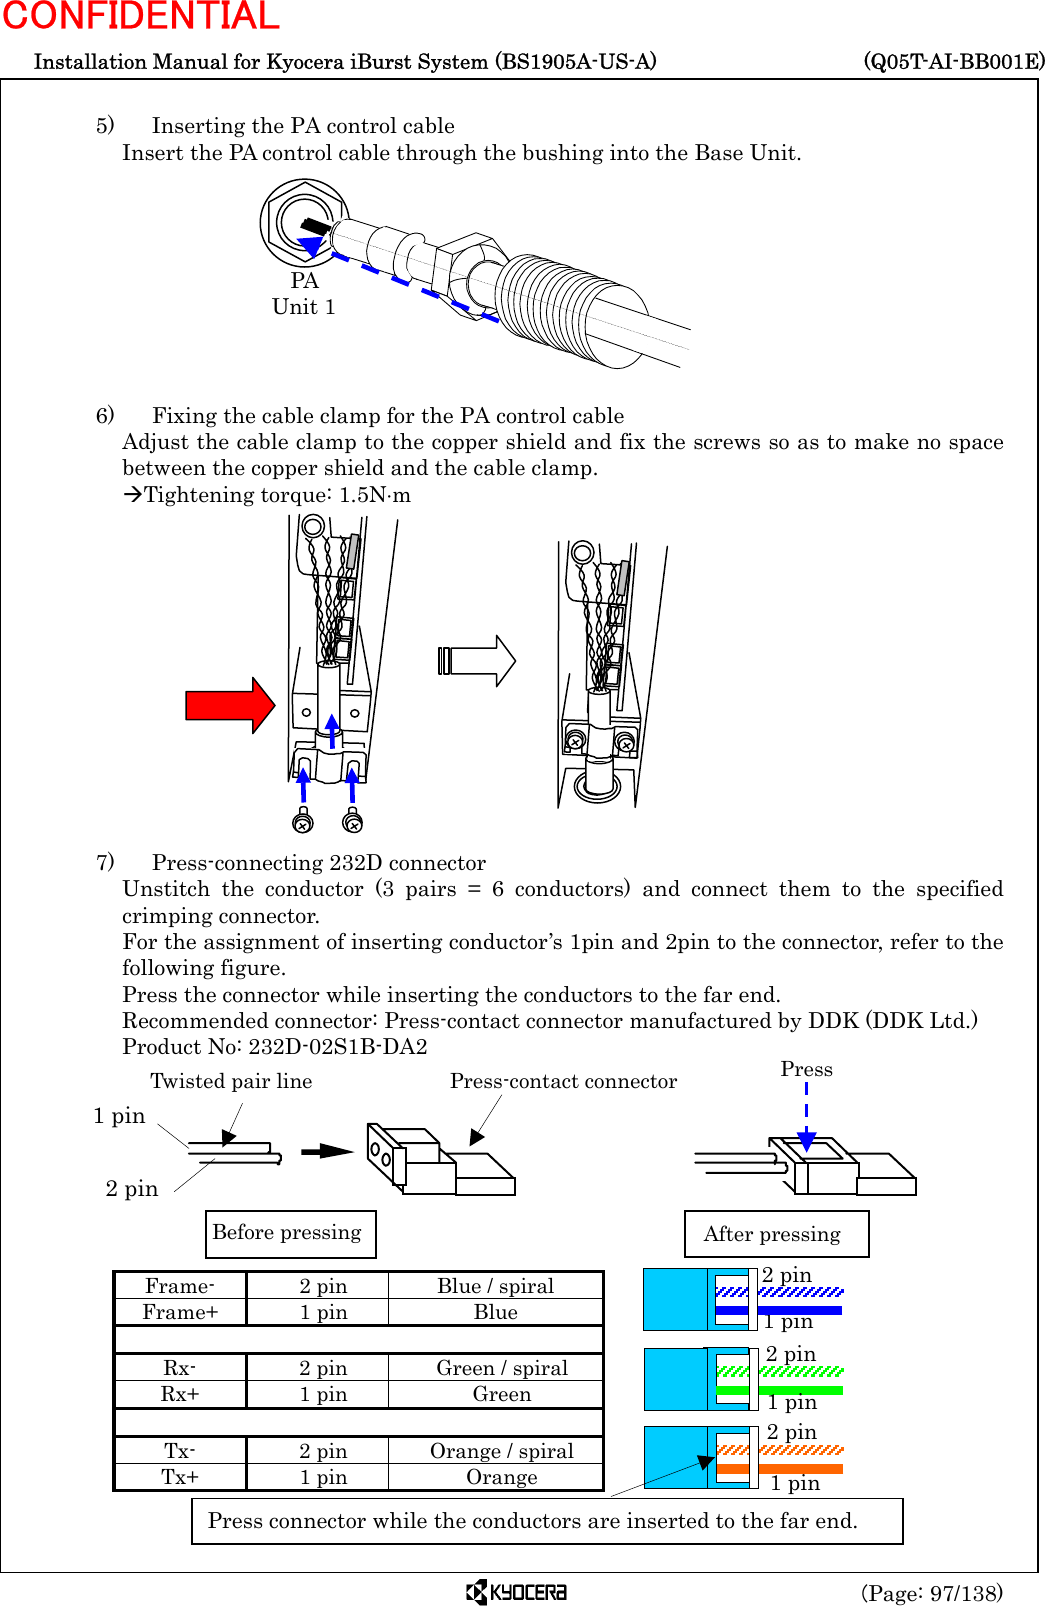  Installation Manual for Kyocera iBurst System (BS1905A-US-A)     (Q05T-AI-BB001E) (Page: 97/138) CONFIDENTIAL  5)    Inserting the PA control cable Insert the PA control cable through the bushing into the Base Unit.          6)    Fixing the cable clamp for the PA control cable Adjust the cable clamp to the copper shield and fix the screws so as to make no space between the copper shield and the cable clamp. ÆTightening torque: 1.5N⋅m              7)    Press-connecting 232D connector Unstitch the conductor (3 pairs = 6 conductors) and connect them to the specified crimping connector. For the assignment of inserting conductor’s 1pin and 2pin to the connector, refer to the following figure. Press the connector while inserting the conductors to the far end. Recommended connector: Press-contact connector manufactured by DDK (DDK Ltd.) Product No: 232D-02S1B-DA2         Frame-  2 pin  Blue / spiral Frame+ 1 pin  Blue     Rx-  2 pin  Green / spiral Rx+ 1 pin  Green     Tx-  2 pin  Orange / spiral Tx+ 1 pin  Orange  Twisted pair line Press-contact connector2 pin1 pinBefore pressing After pressingPressPA  Unit 1 Press connector while the conductors are inserted to the far end. 1 pin 2 pin 2 pin 2 pin 1 pin 1 pin 